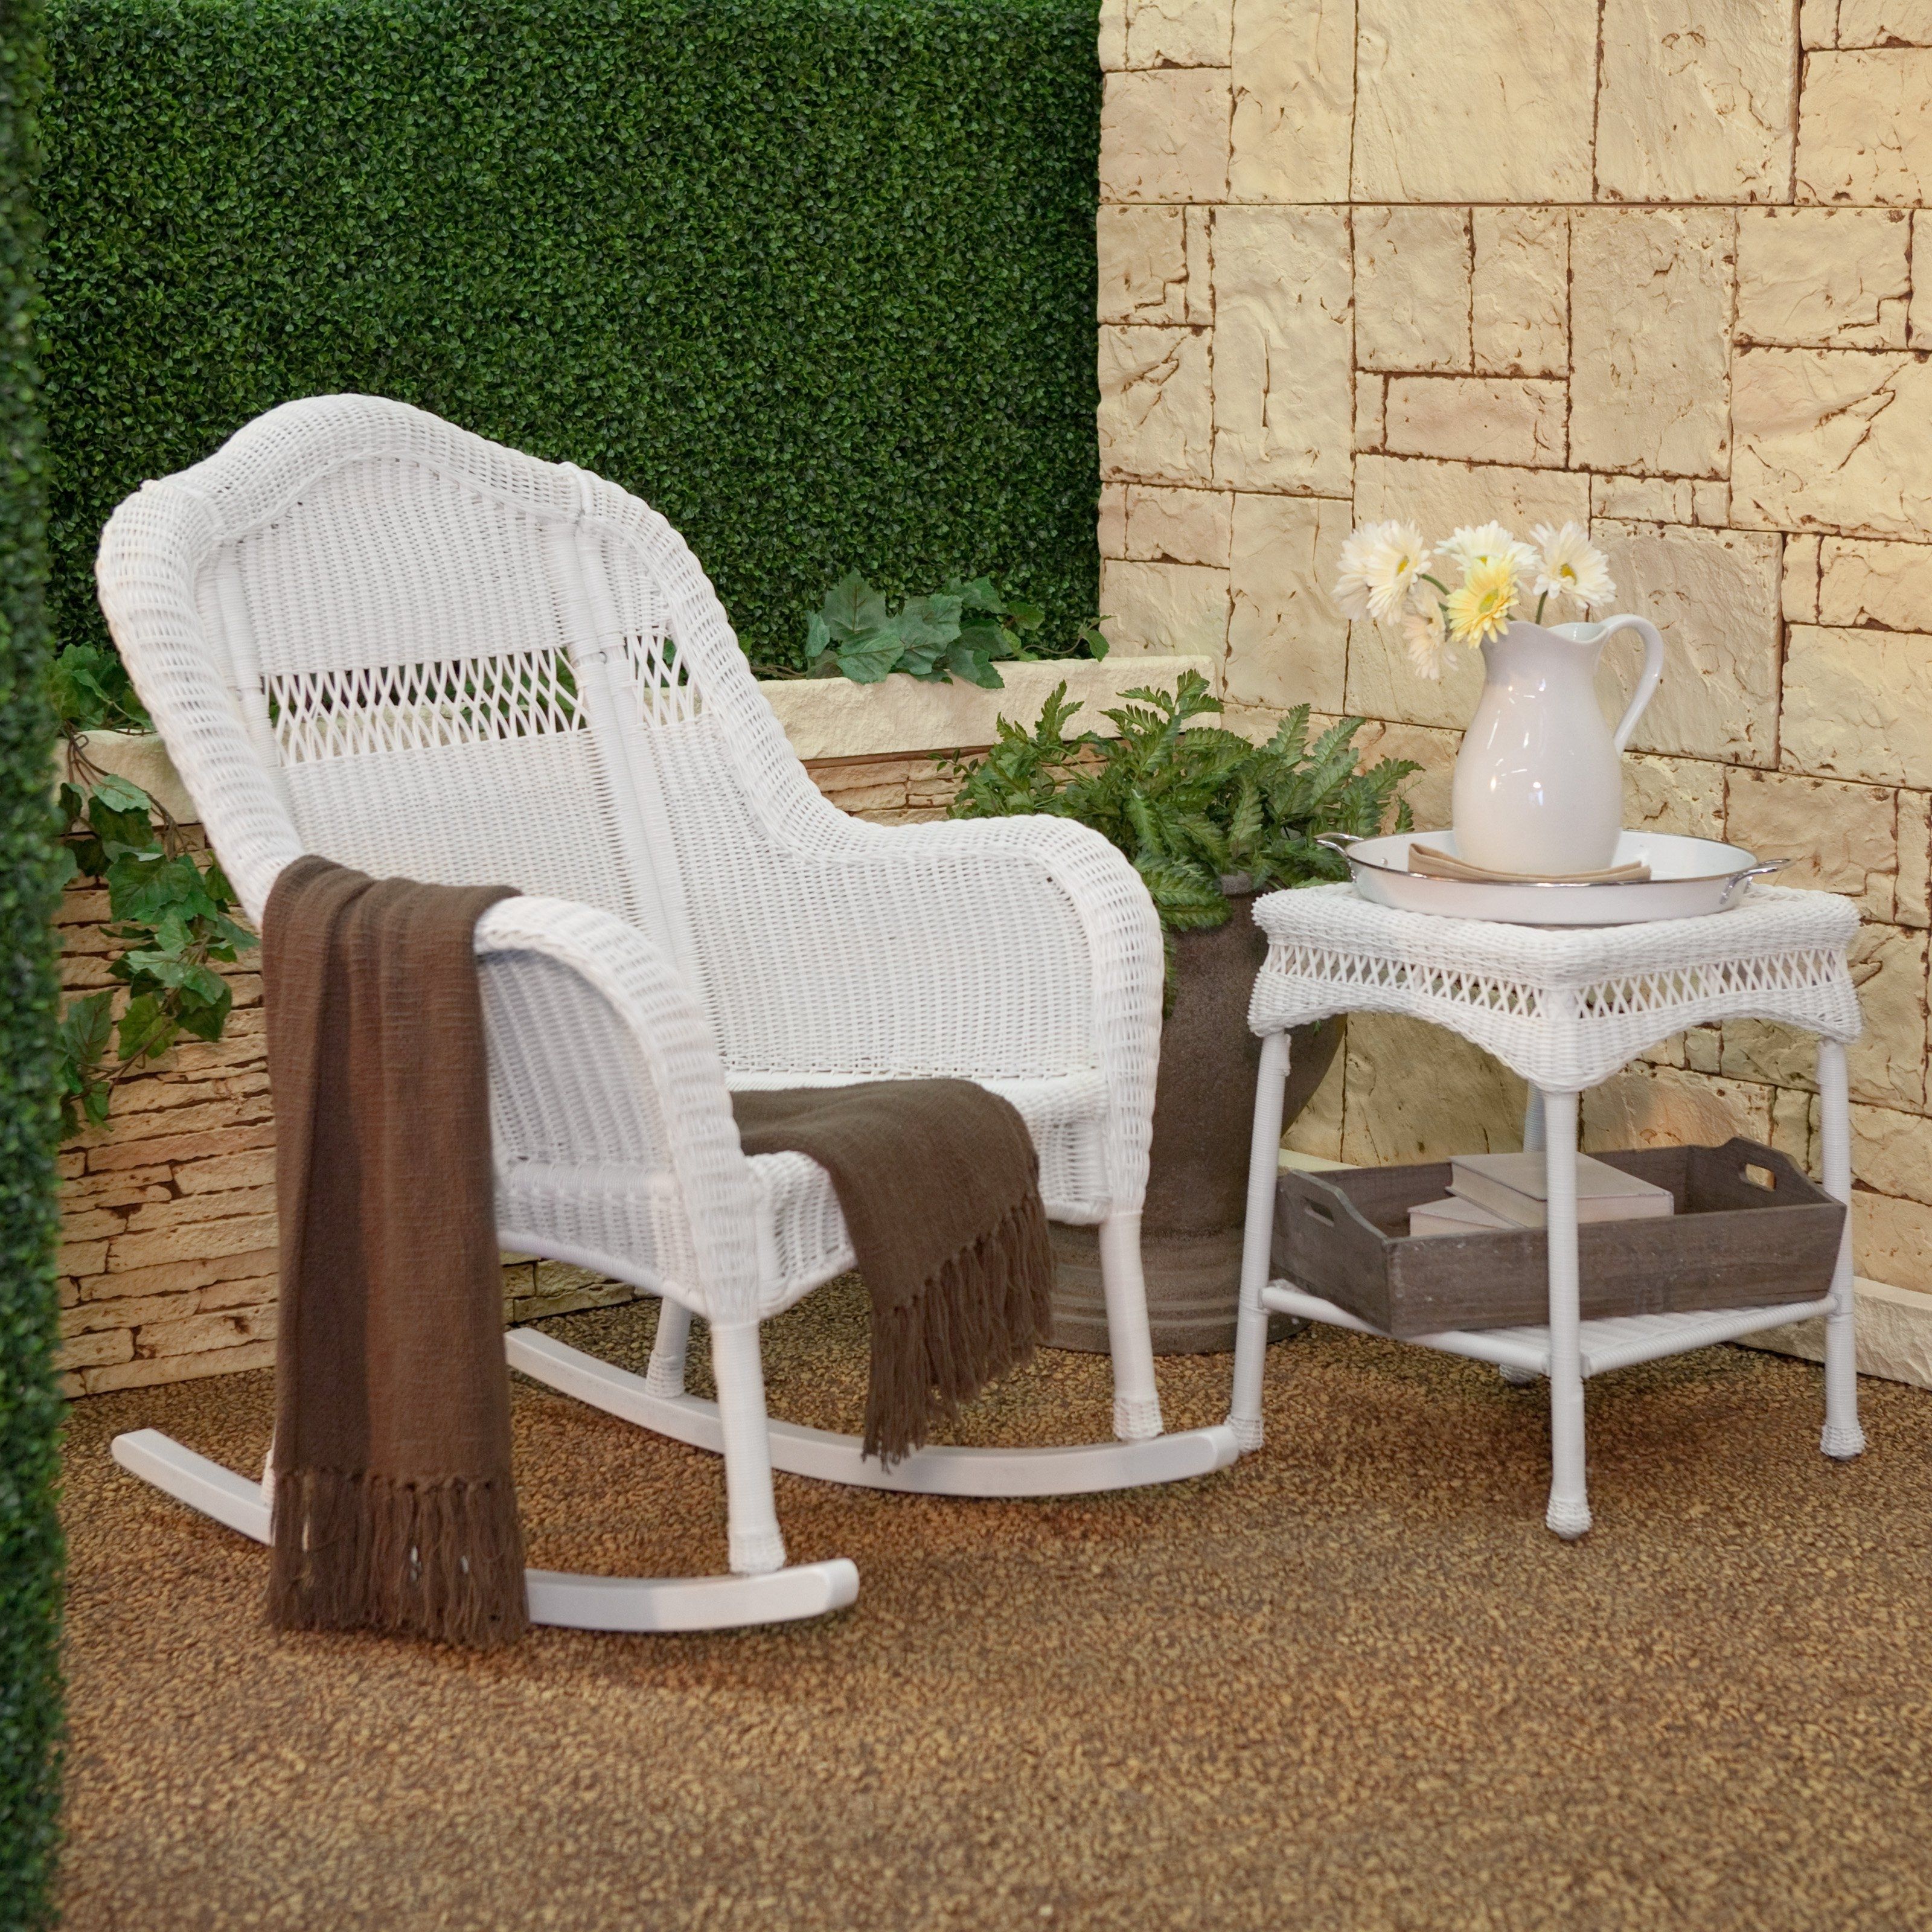 Outdoor Wicker Rocking Chairs With Cushions Within Well Known Coral Coast Casco Bay Resin Wicker Rocking Chair With Cushion Option (View 5 of 15)